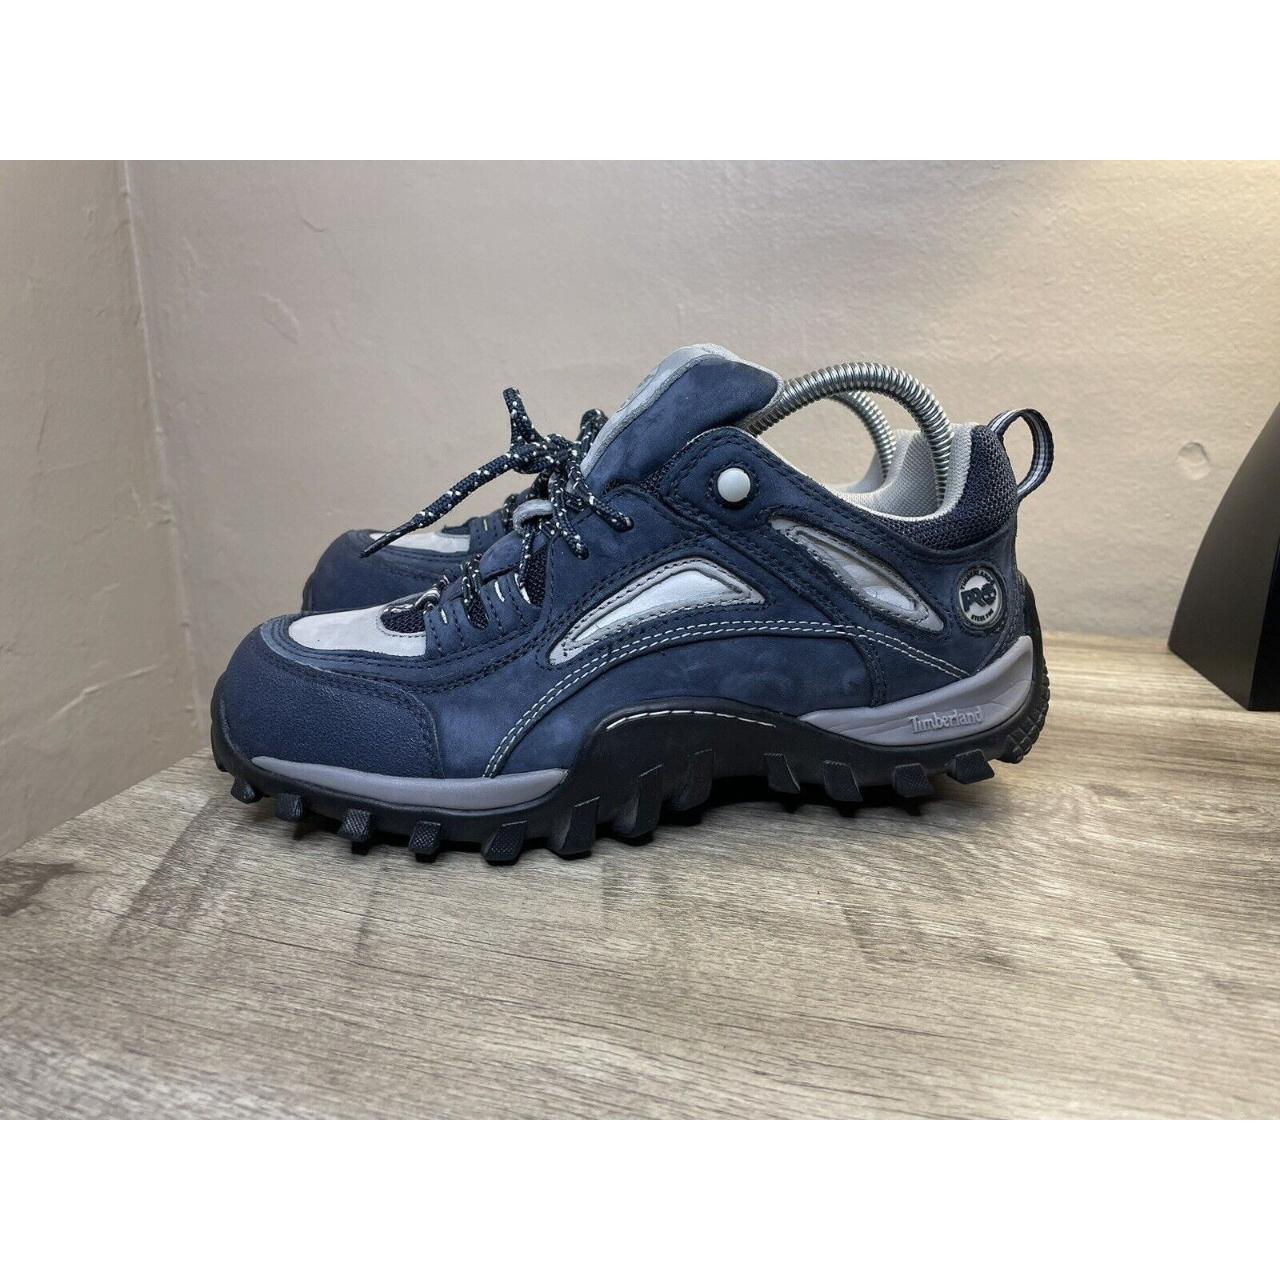 Timberland Pro Mudsill Low Steel Toe Shoes, perfect... - Depop